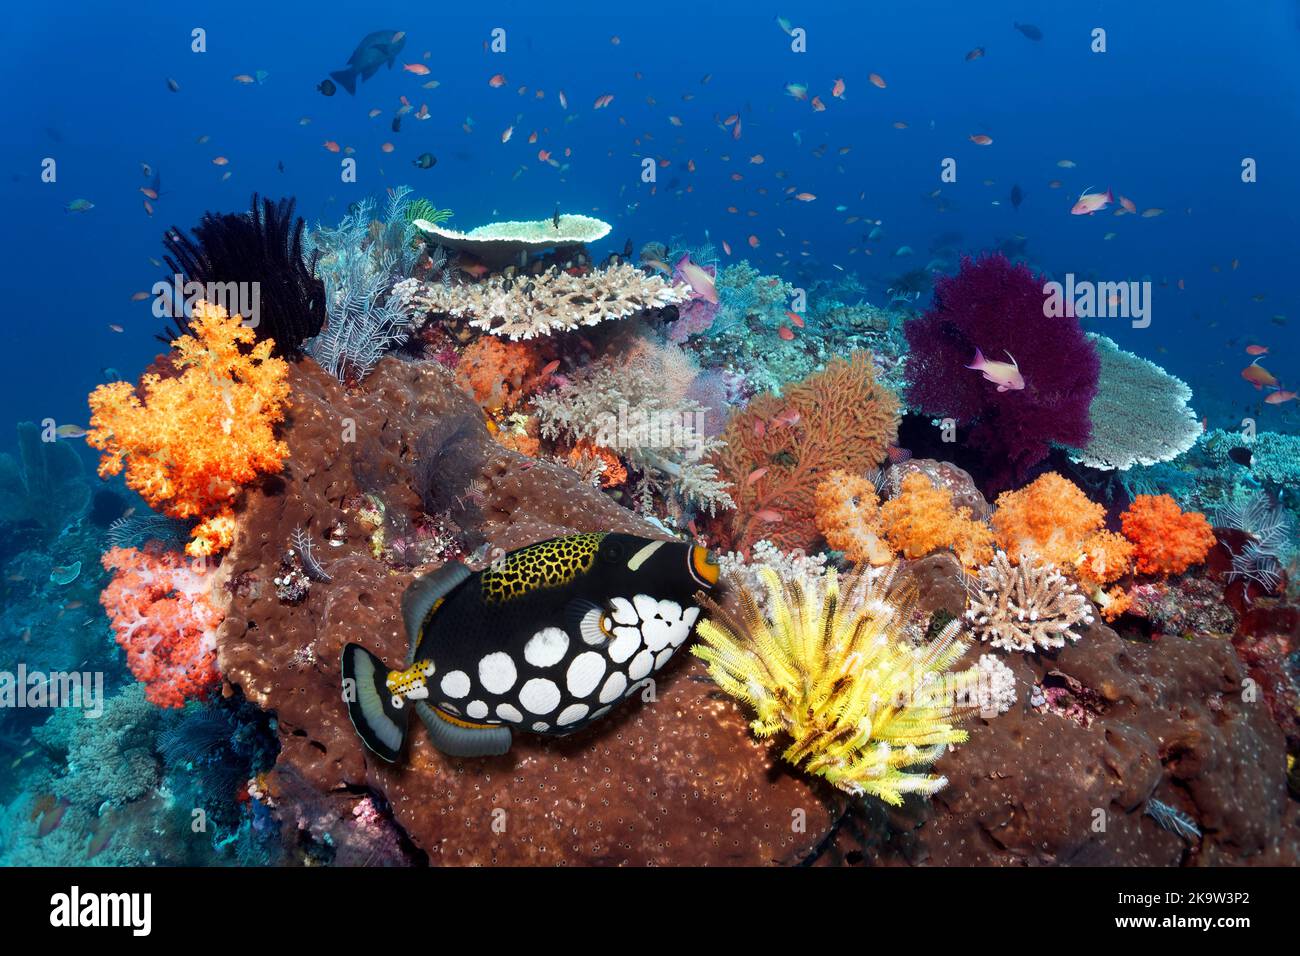 Intact reef top with various multicoloured soft corals (Alcyonacea), stony corals (Scleractinia), brown sponge (Porifera), feather star (Comatulida) Stock Photo